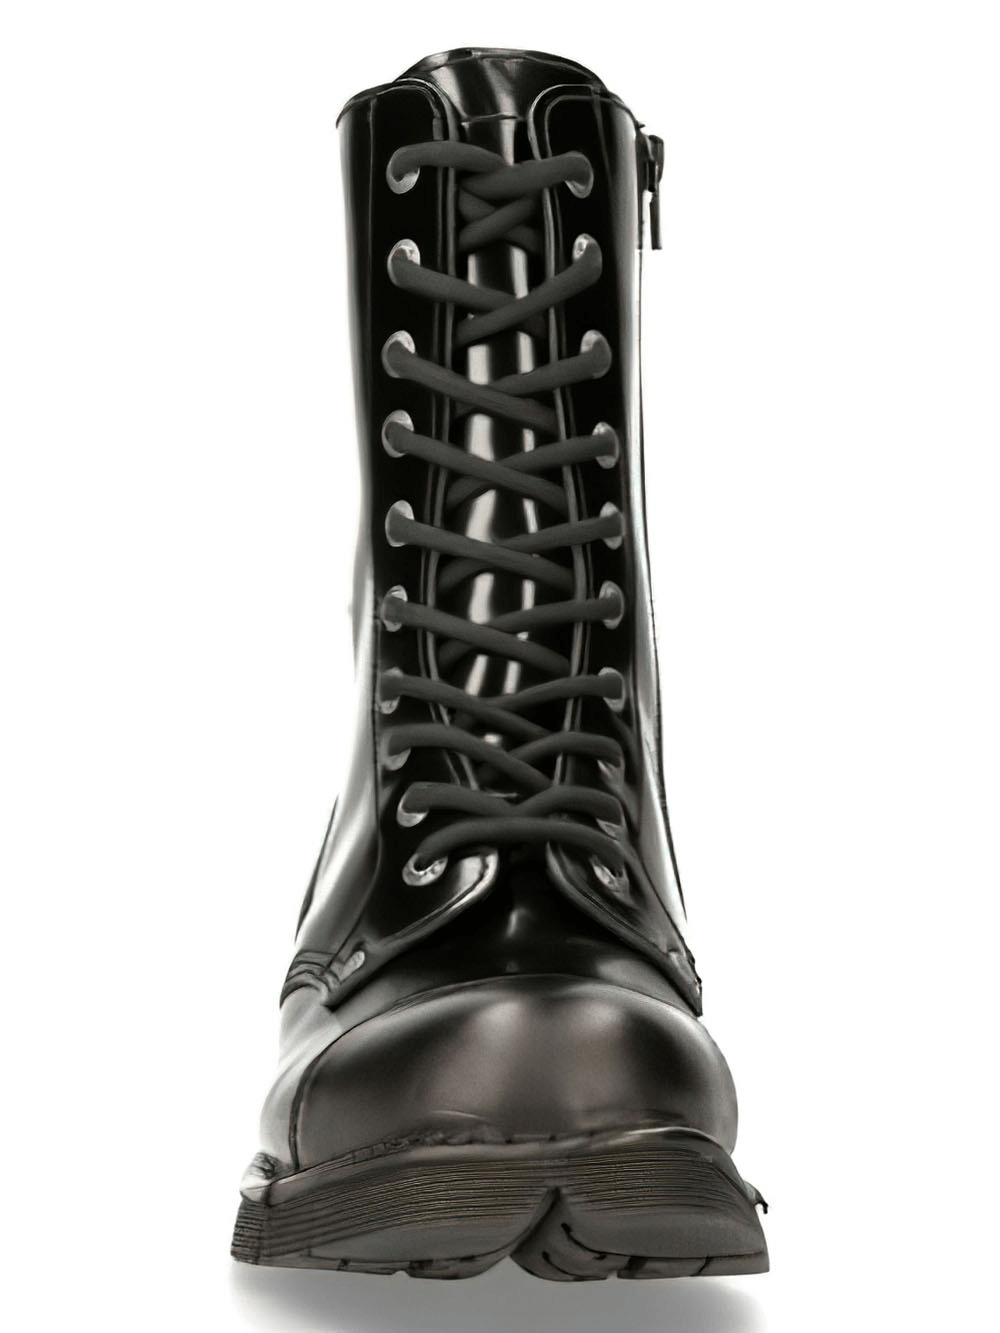 NEW ROCK Black Lace-Up Military Style Ankle Boots